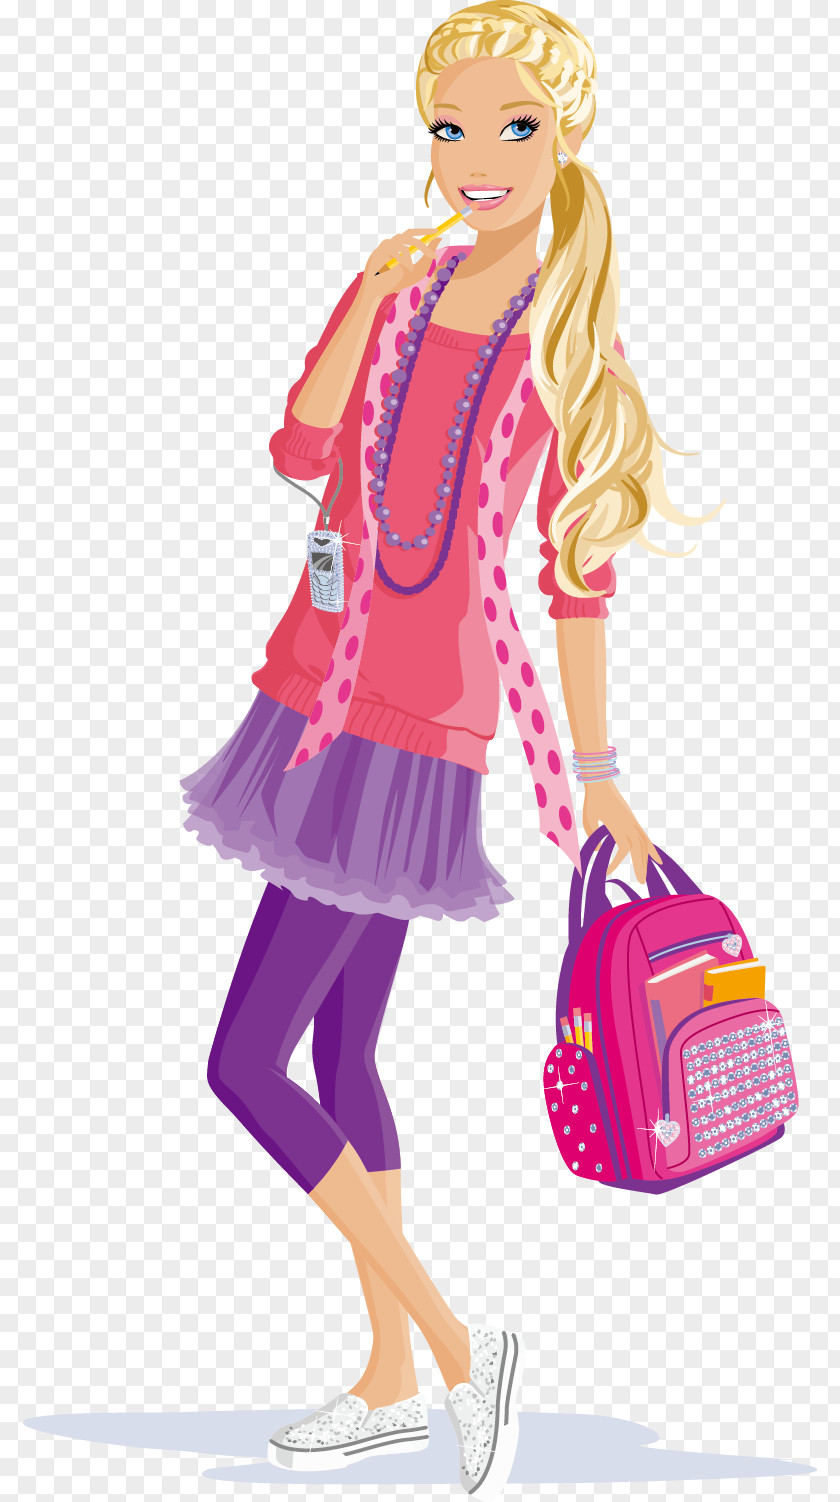 Barbie: The Princess & Popstar Doll Barbie Girl PNG the , Hair girl bag hand-painted cartoon clipart PNG